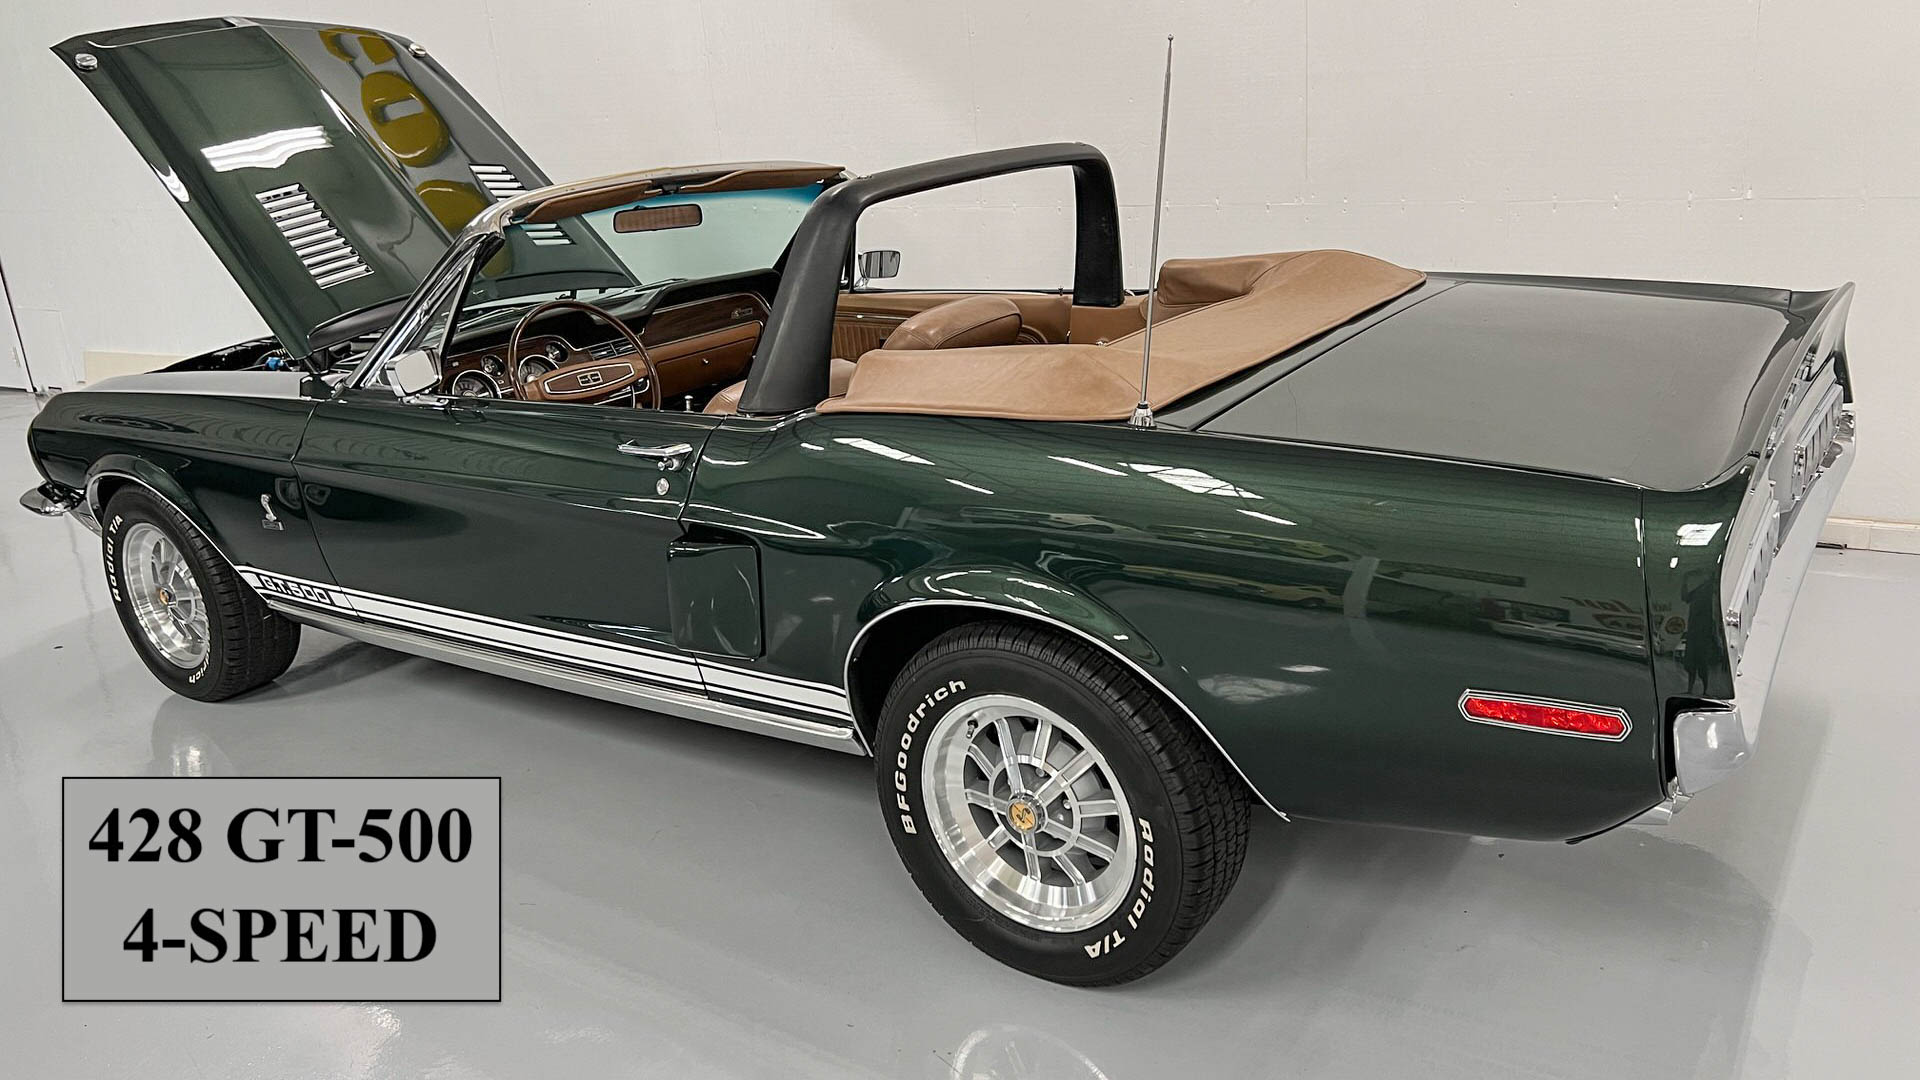 1968 Shelby Mustang convertible GT500 Highland Green 4-Speed